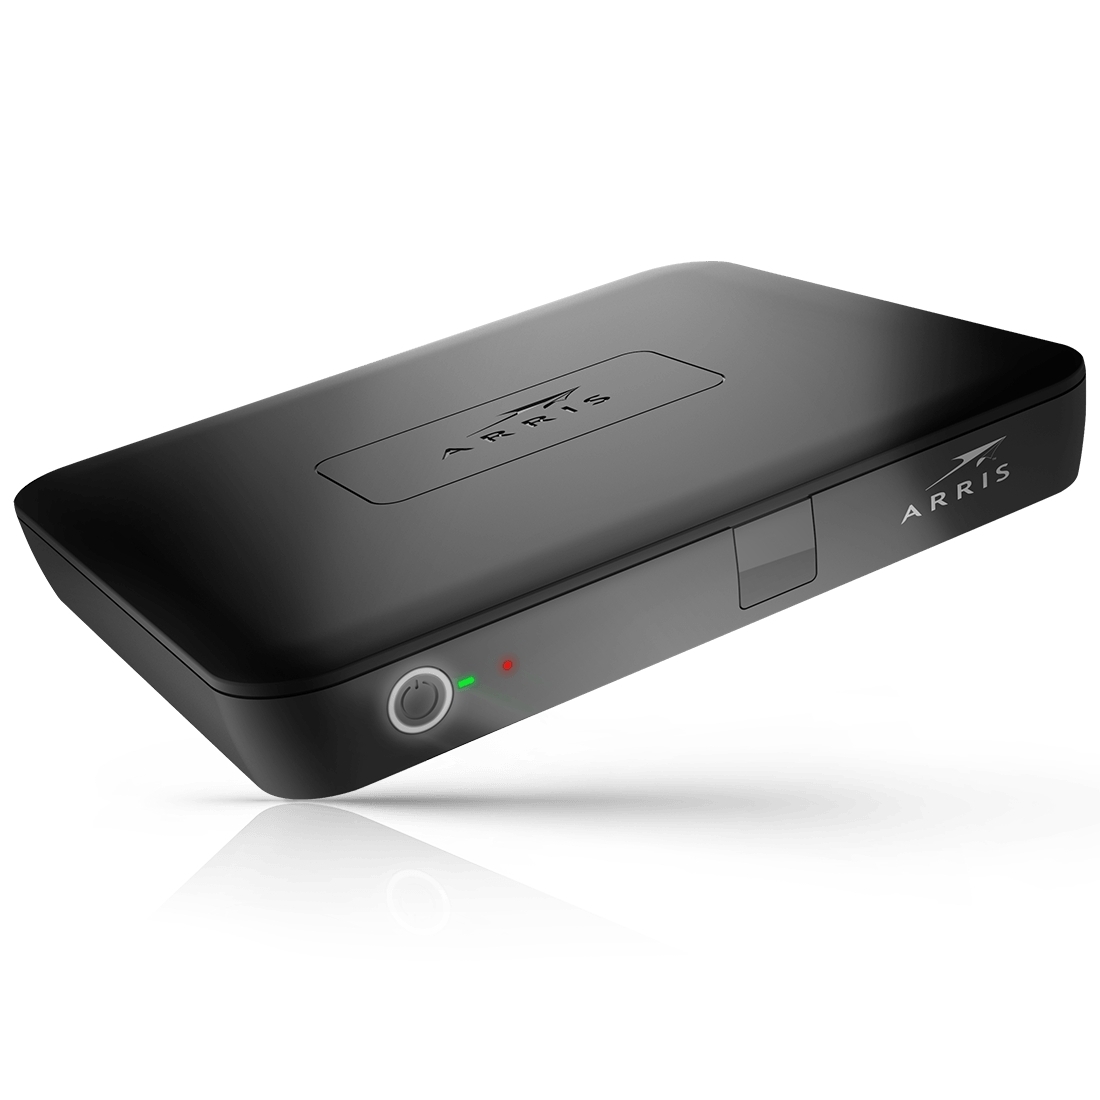 Arris Launches Its First Us Android Tv Stb With Tds Telecom Digital Tv Europe